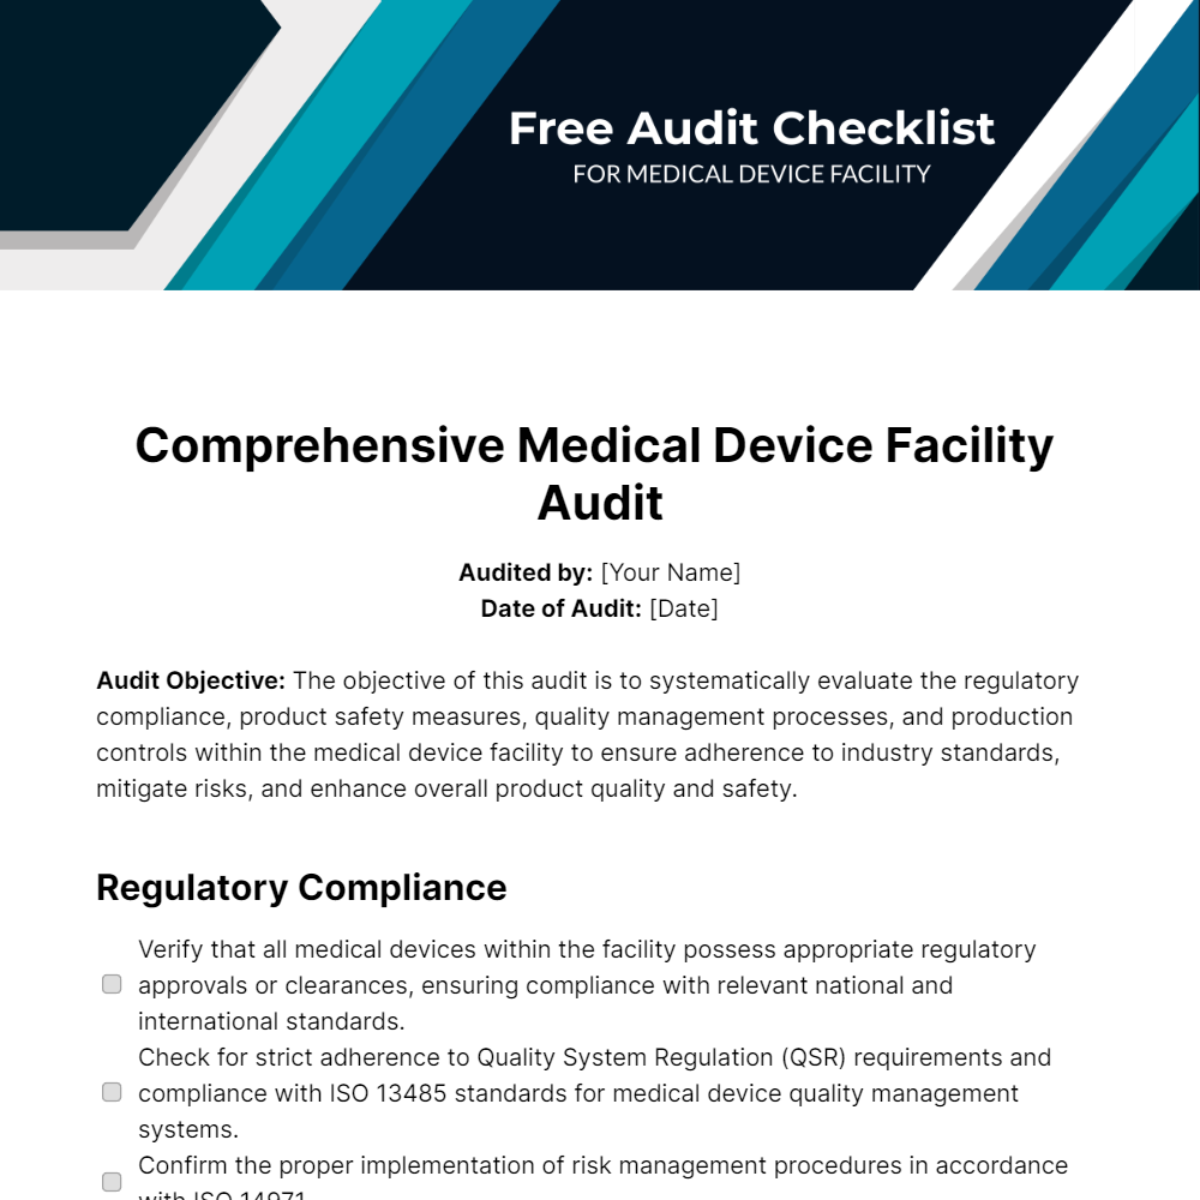 Free Audit Checklist for Medical Device Facility Template